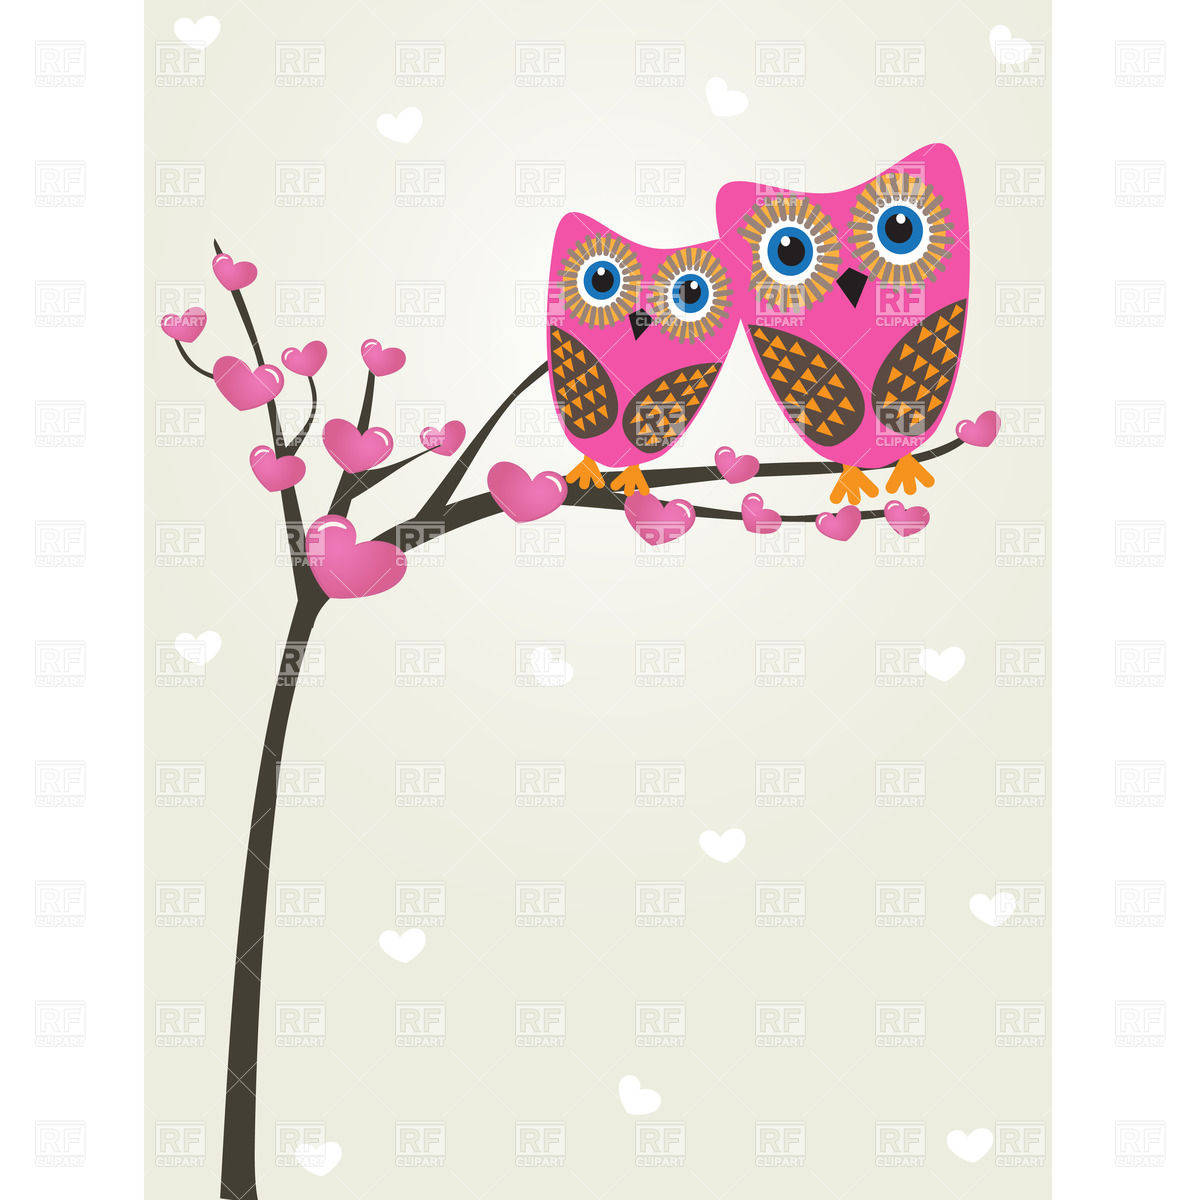 Greetings card with two cute owls on the tree branch, 22837 ...